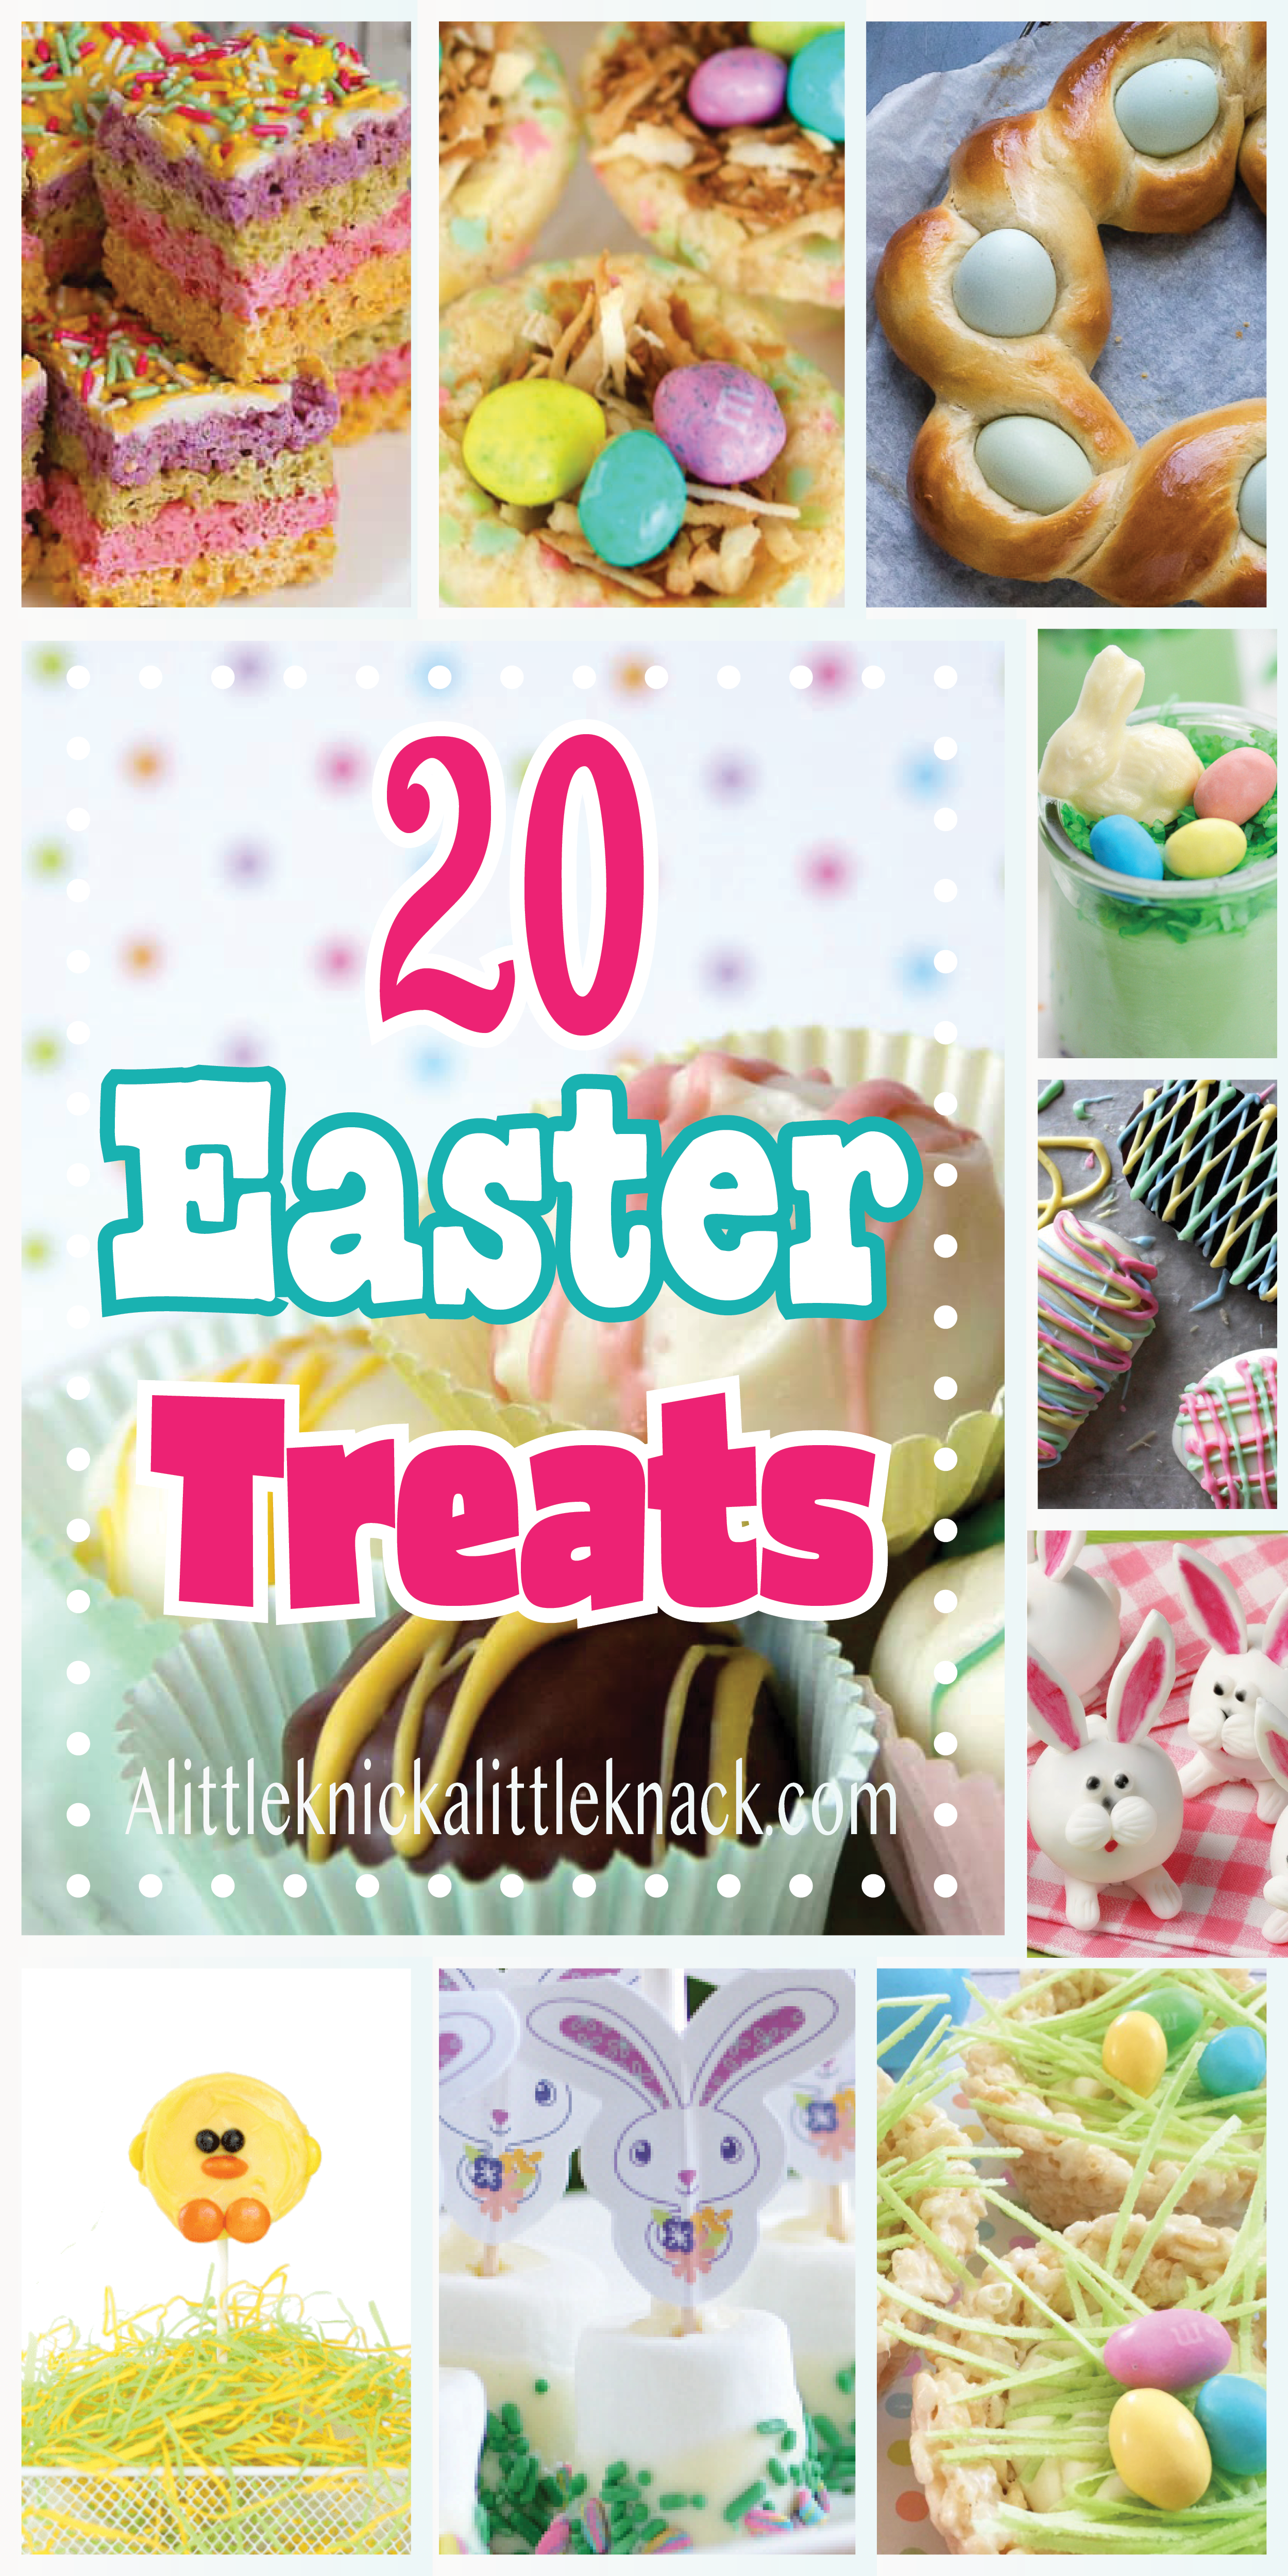 Collage of 10 different easter desserts with text overlay